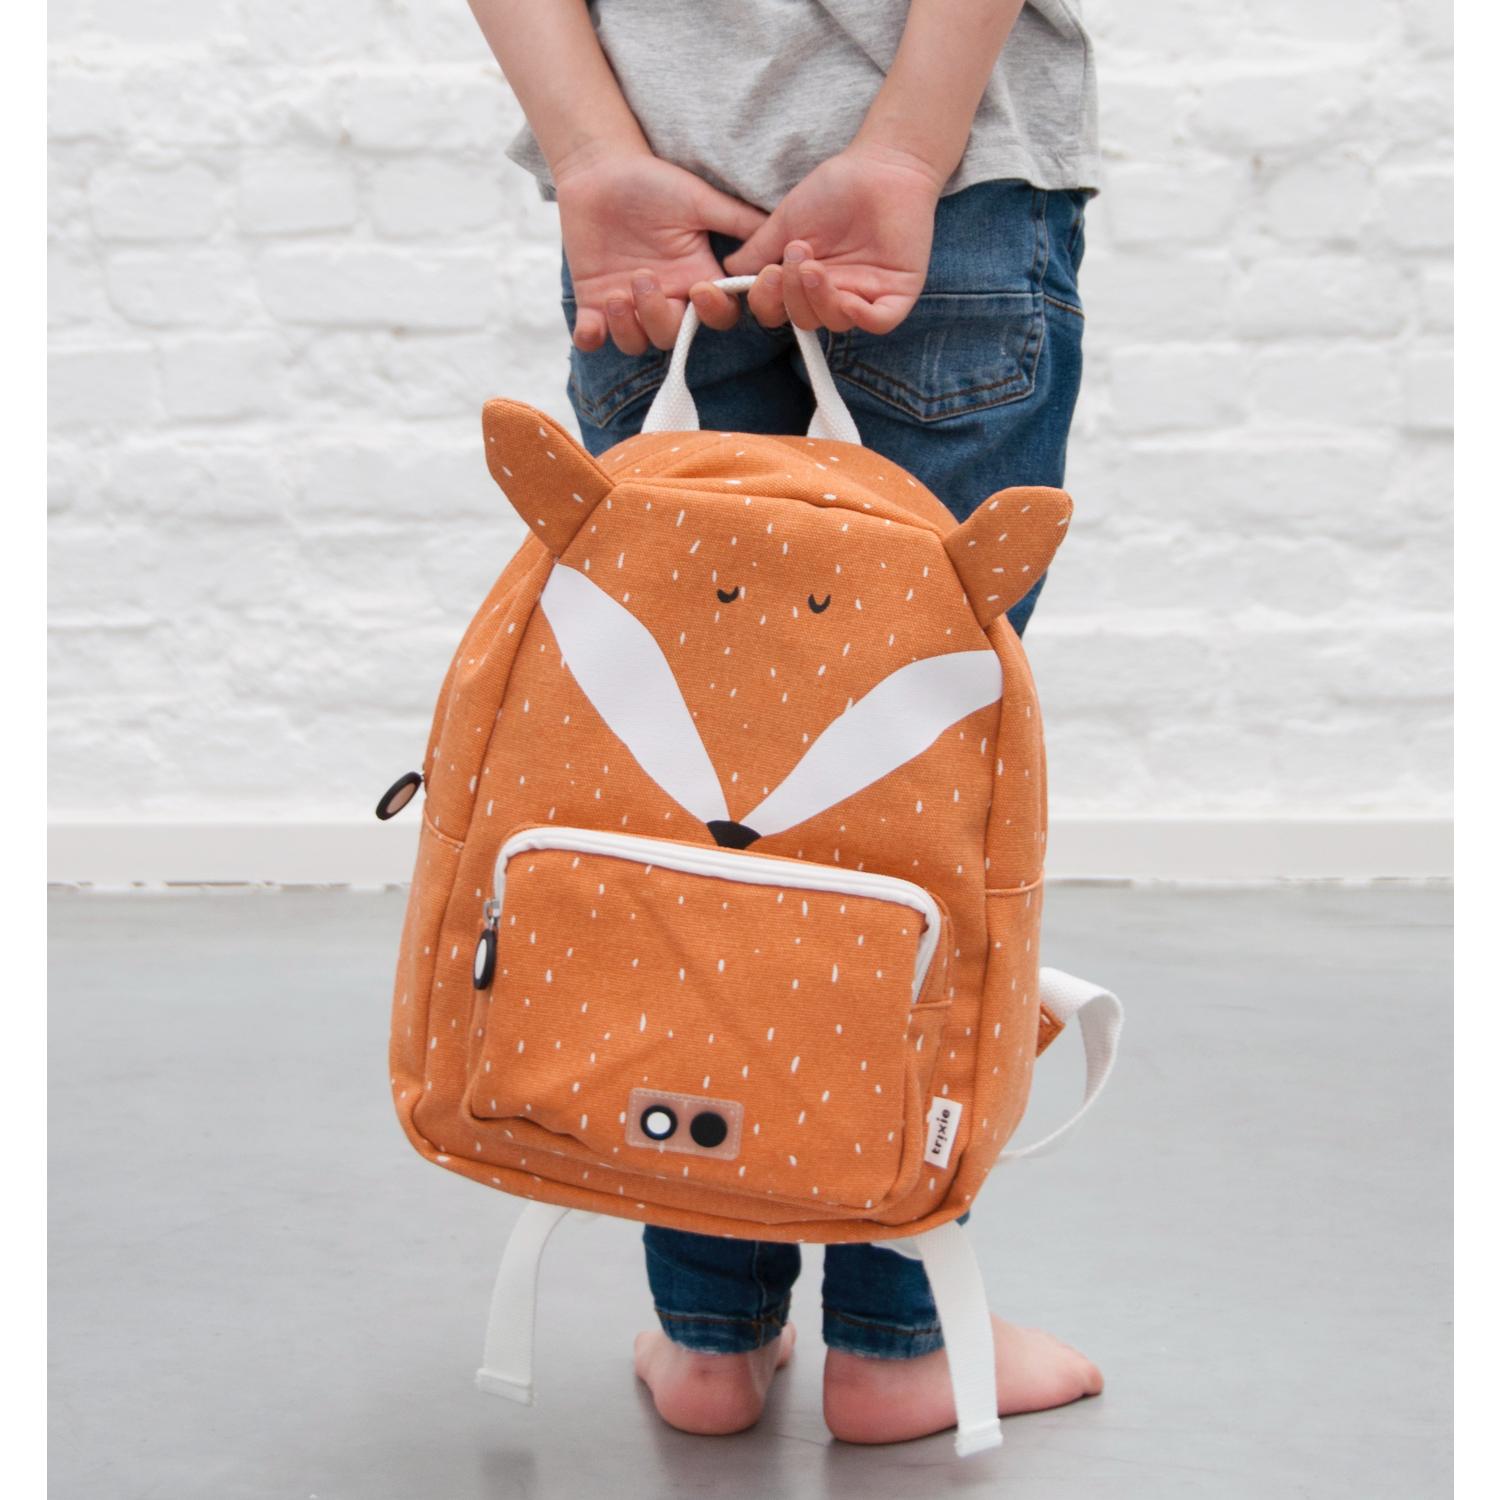 Trixie Mr. Fox Backpack | Kid’s Backpack for Creche, Nursery & School | Lifestyle: Child Holding Backpack | BeoVERDE.ie